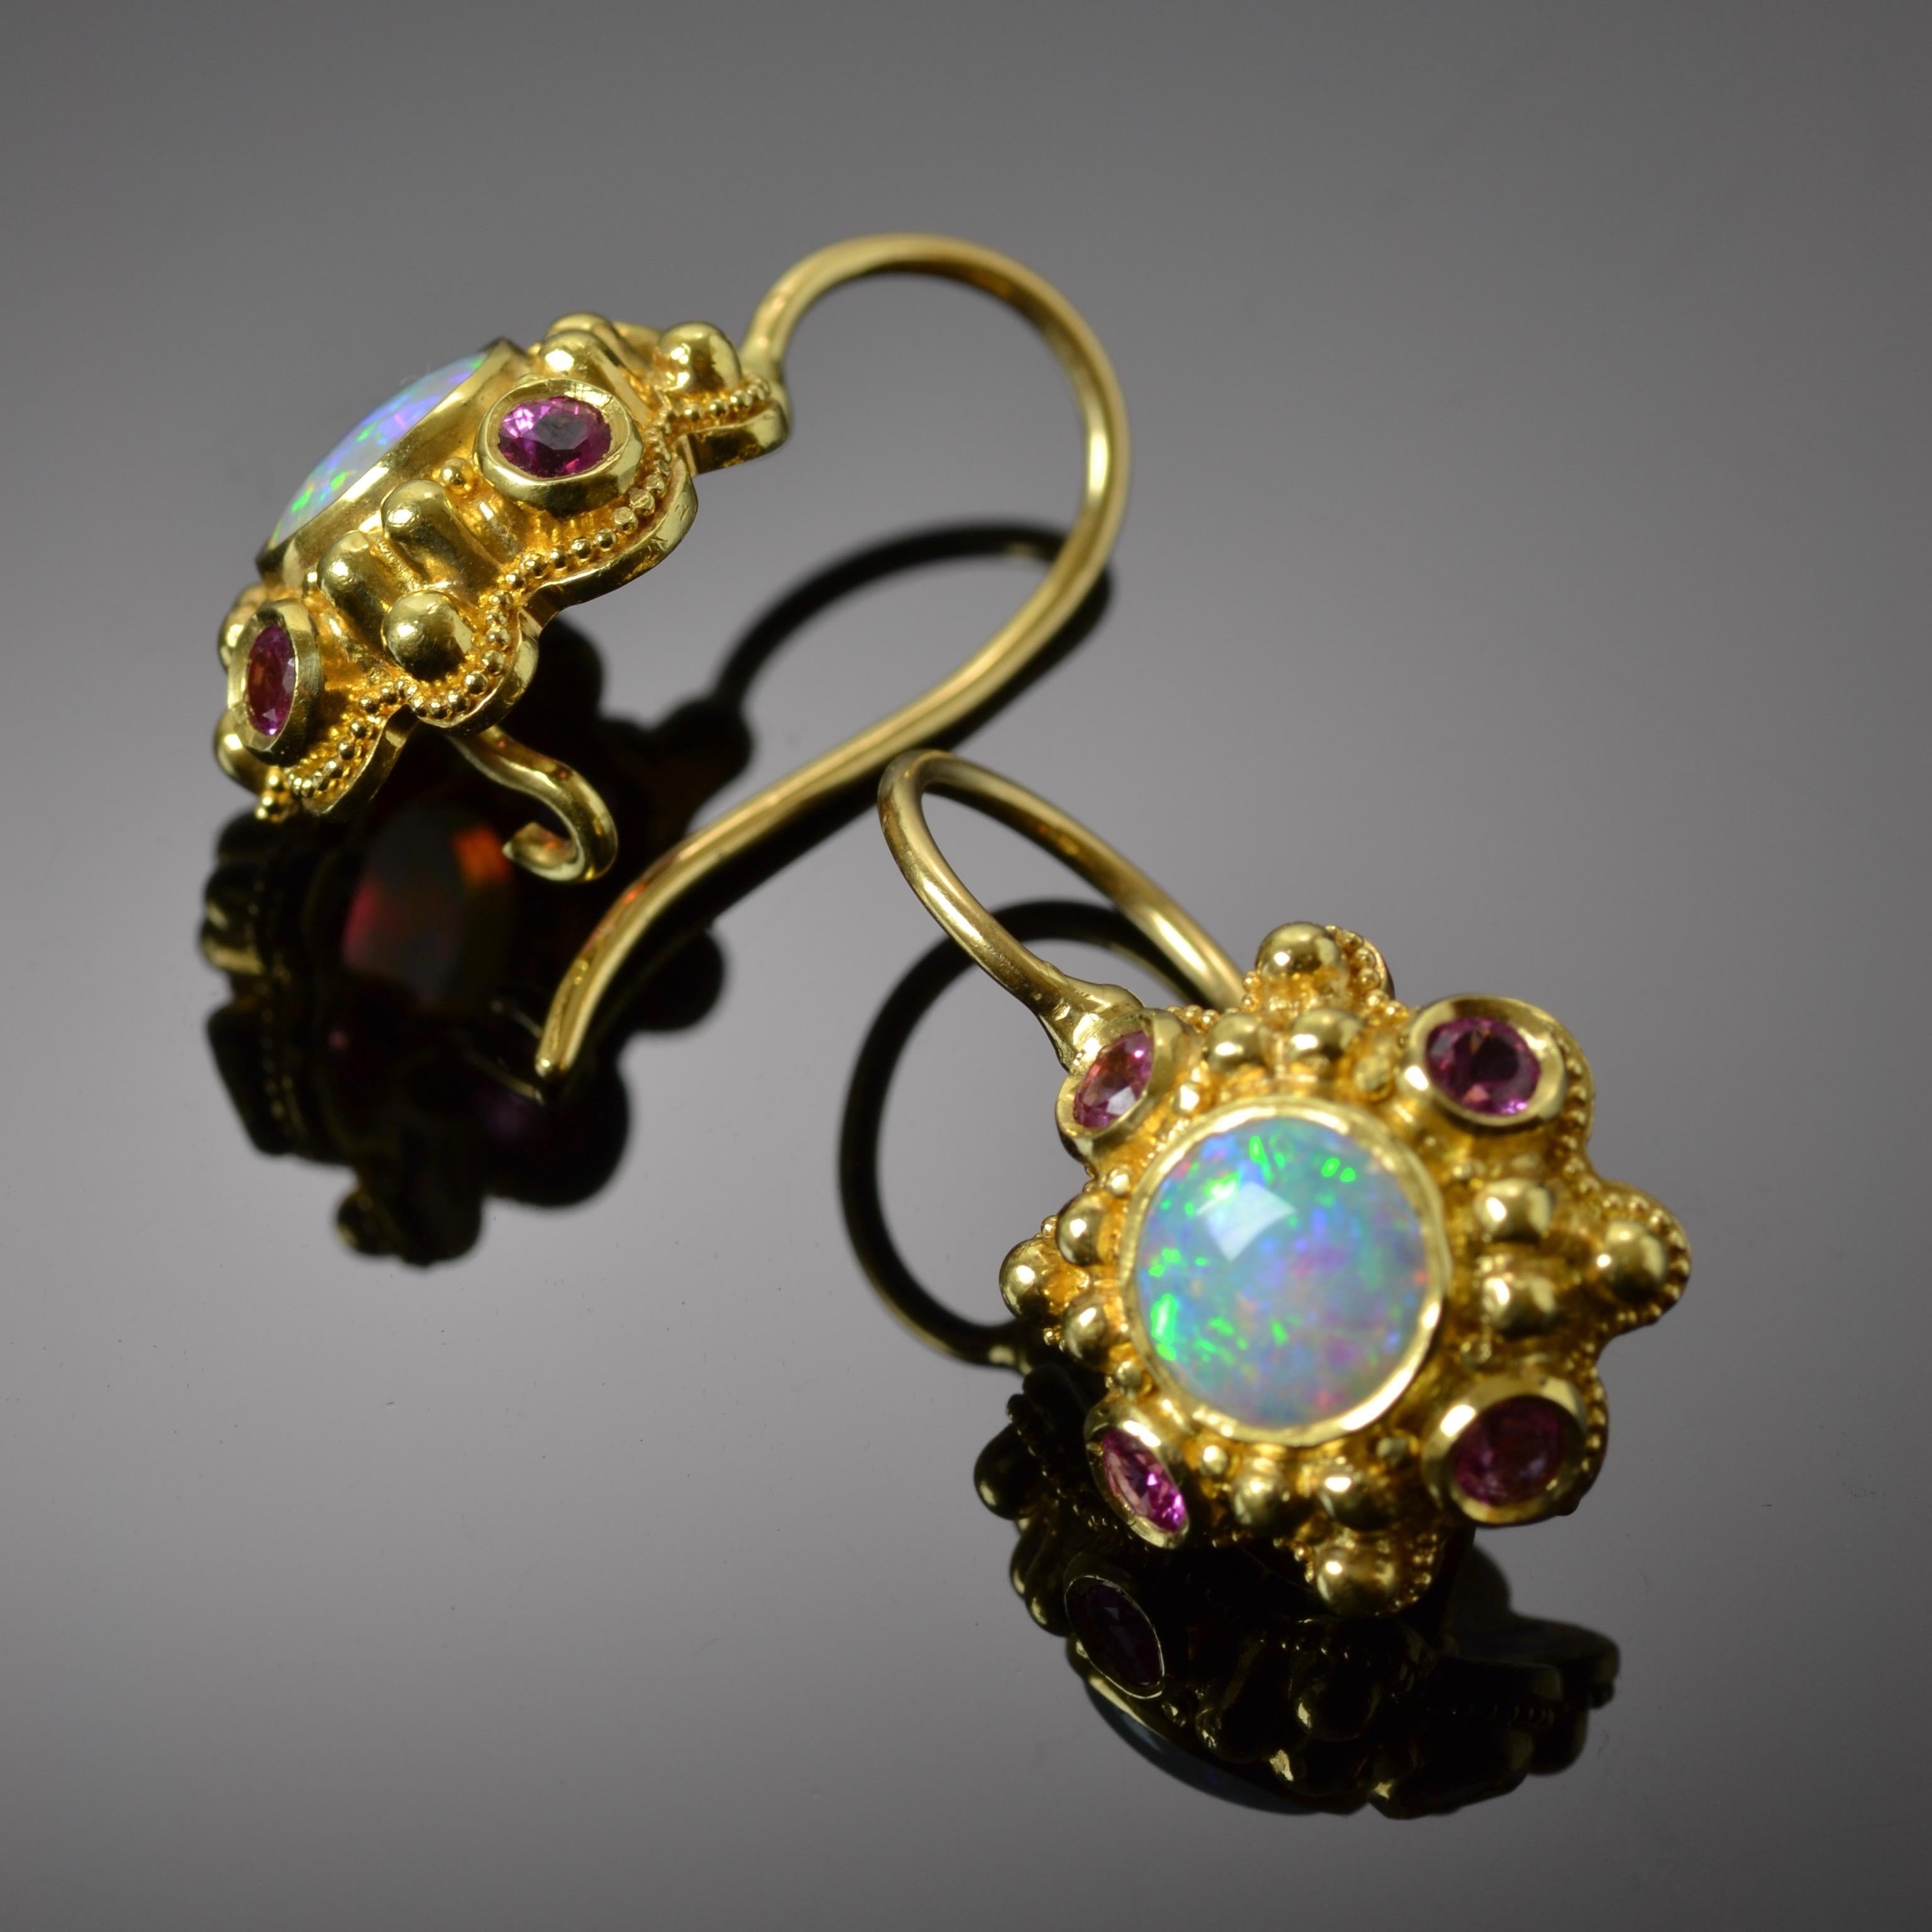 Contemporary Kent Raible 18 Karat Gold Opal and Pink Sapphire Drop Earrings with Granulation